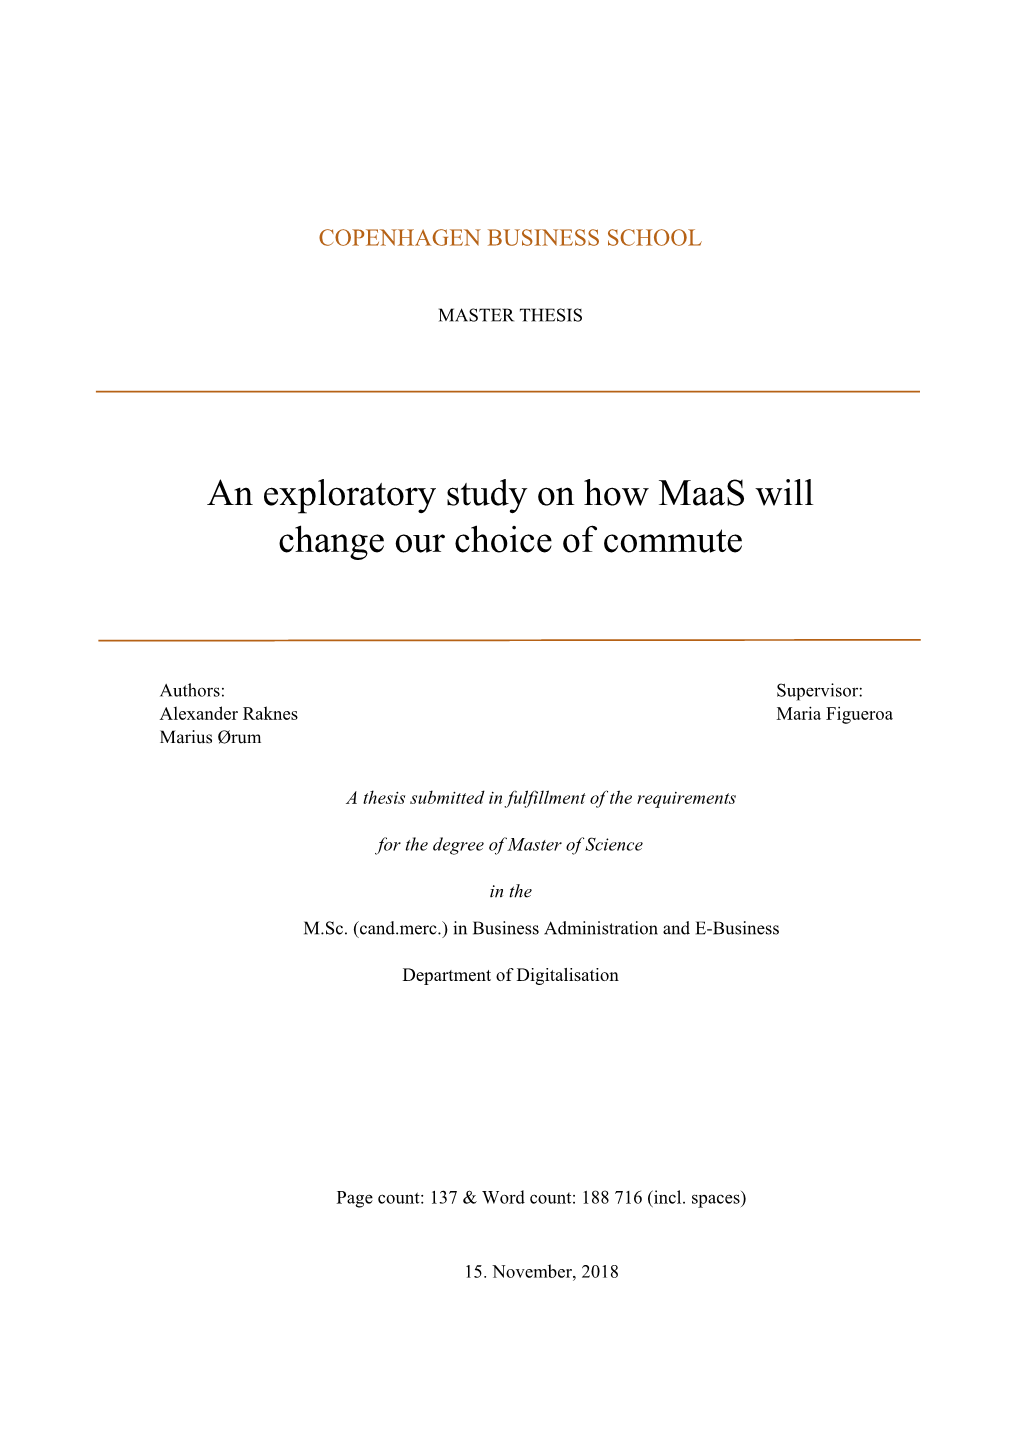 An Exploratory Study on How Maas Will Change Our Choice of Commute